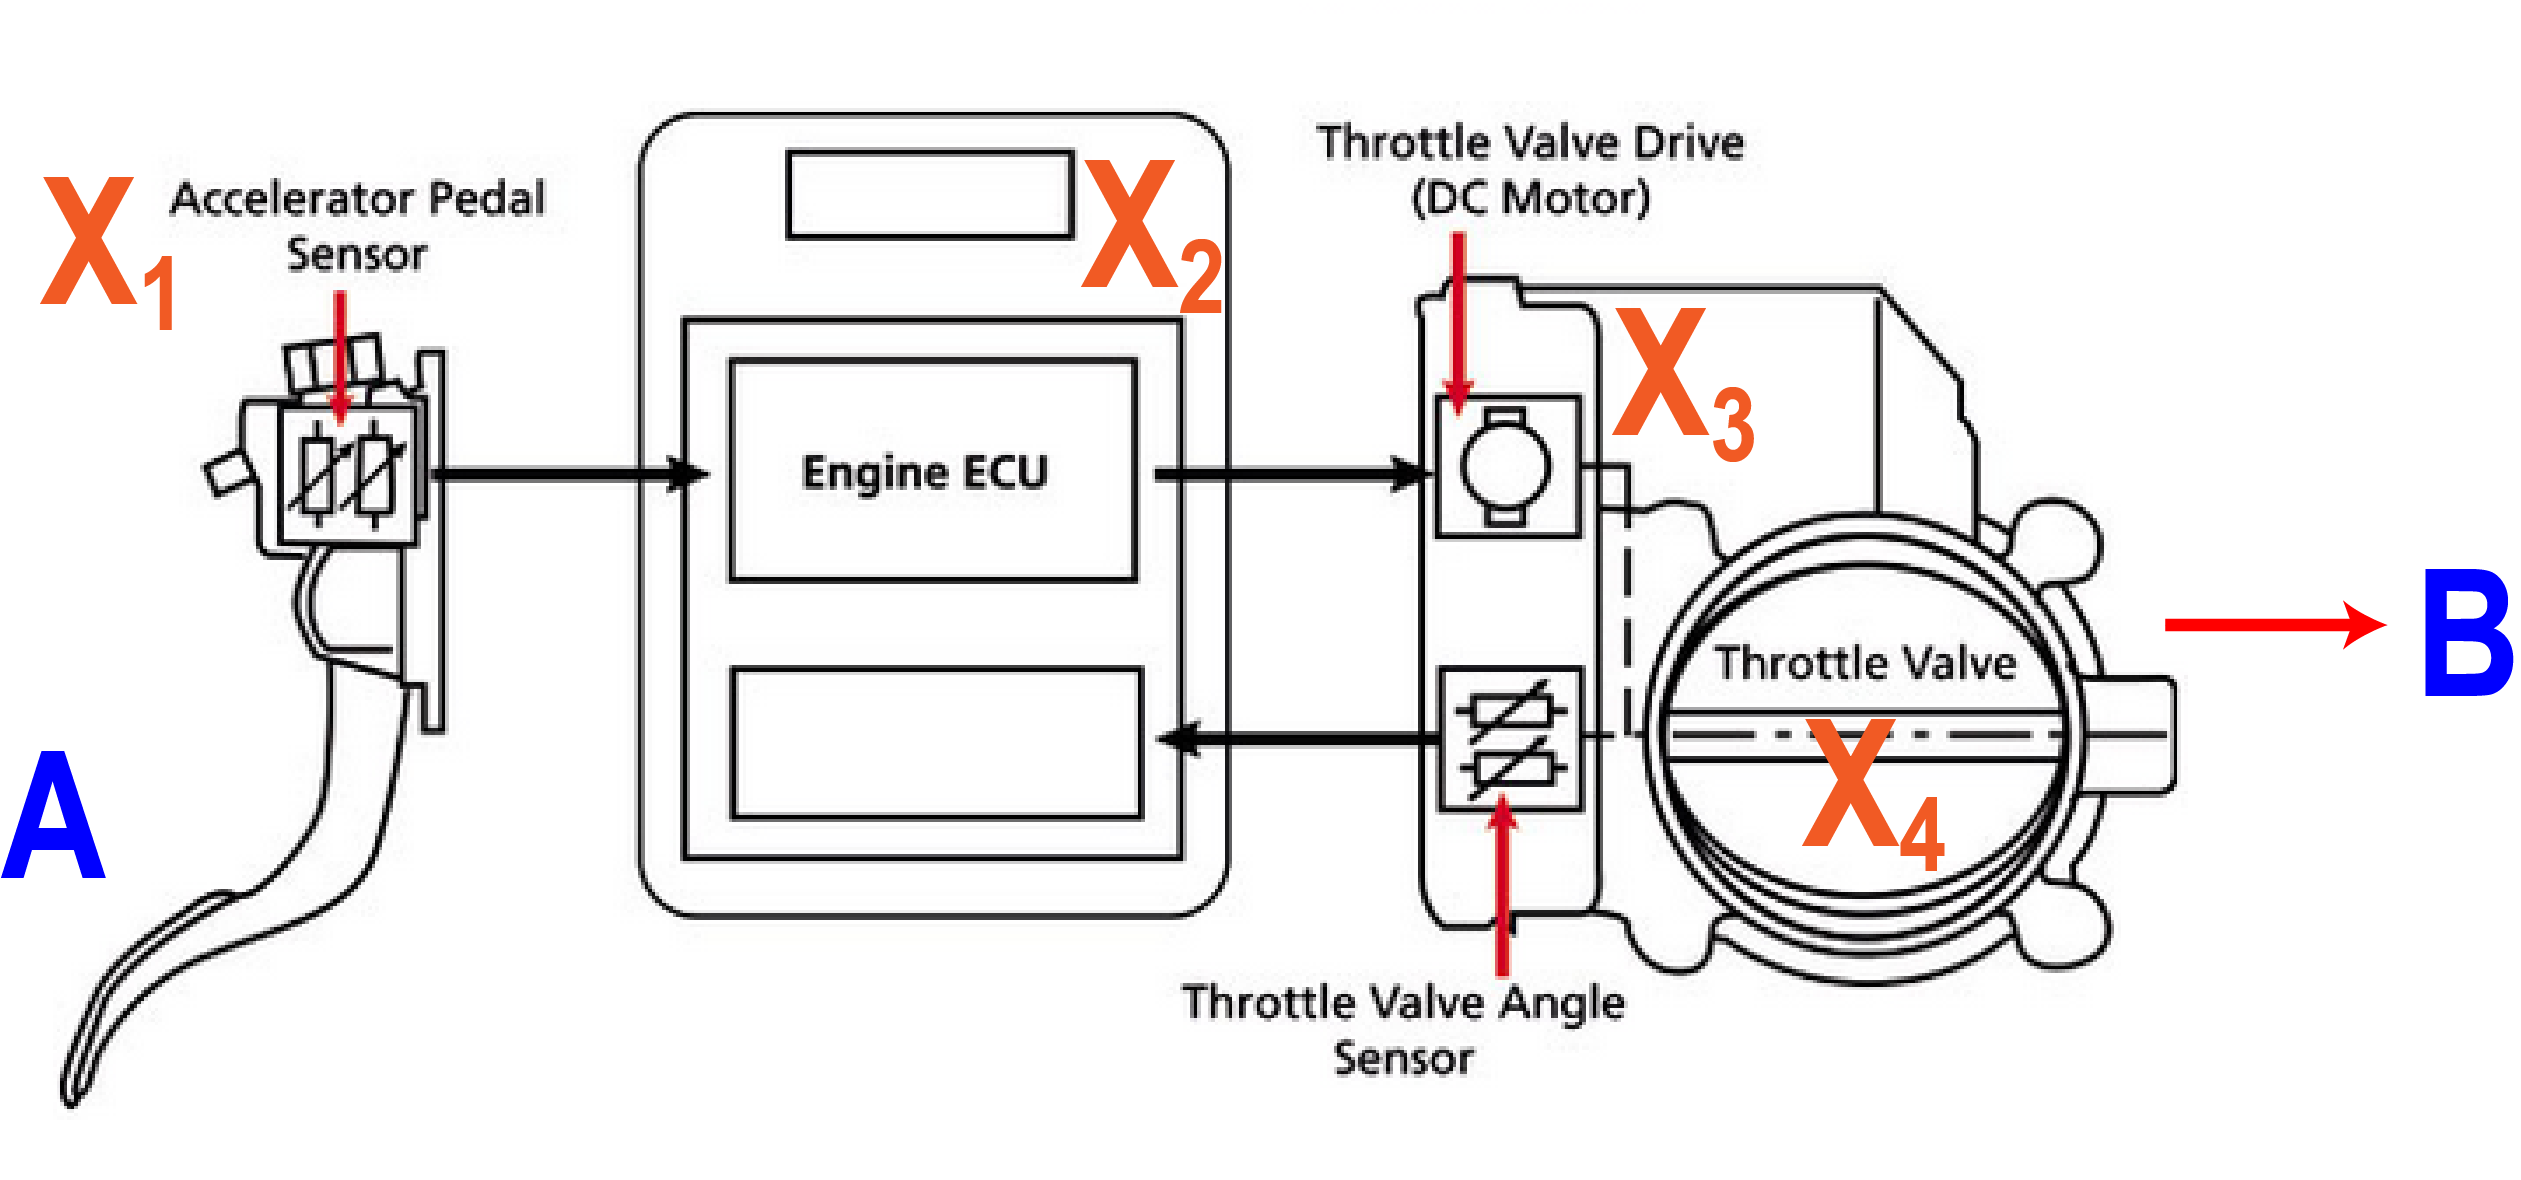 Image showing a schematic of a modern throttle system, labelled with letters A, B, X1, X2, X3, and X4